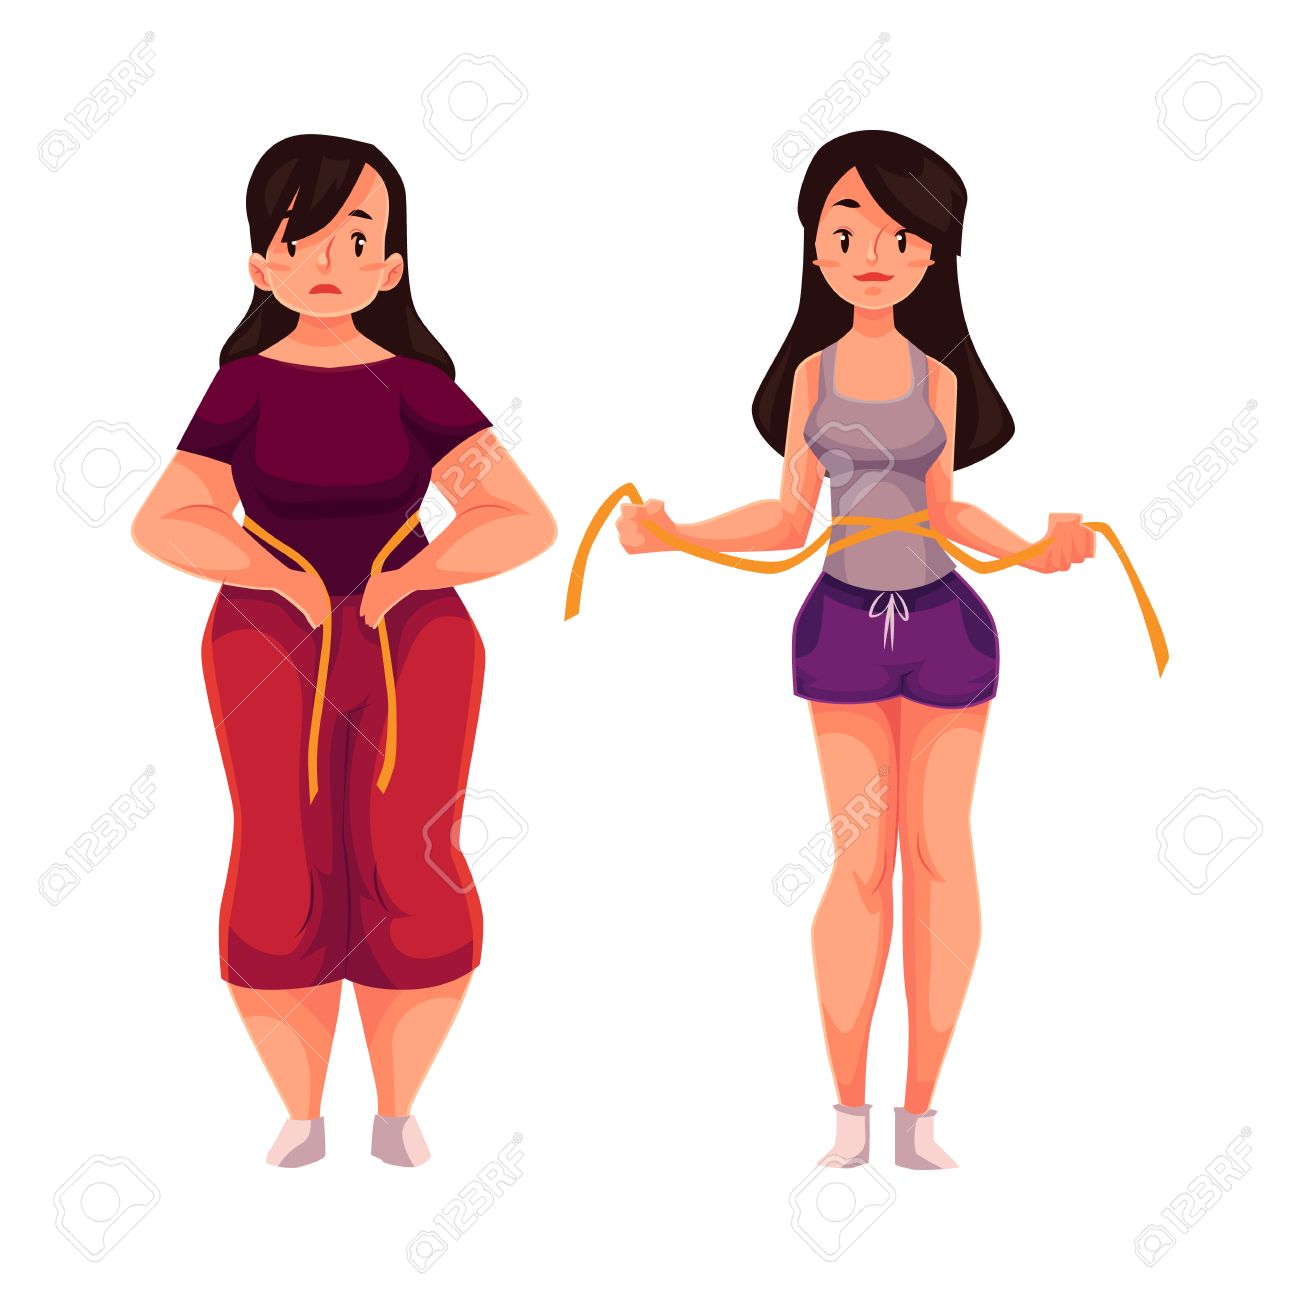 Woman Measuring Waist Before And After Loosing Weight, Cartoon.. Royalty  Free Cliparts, Vectors, And Stock Illustration. Image 67829873.